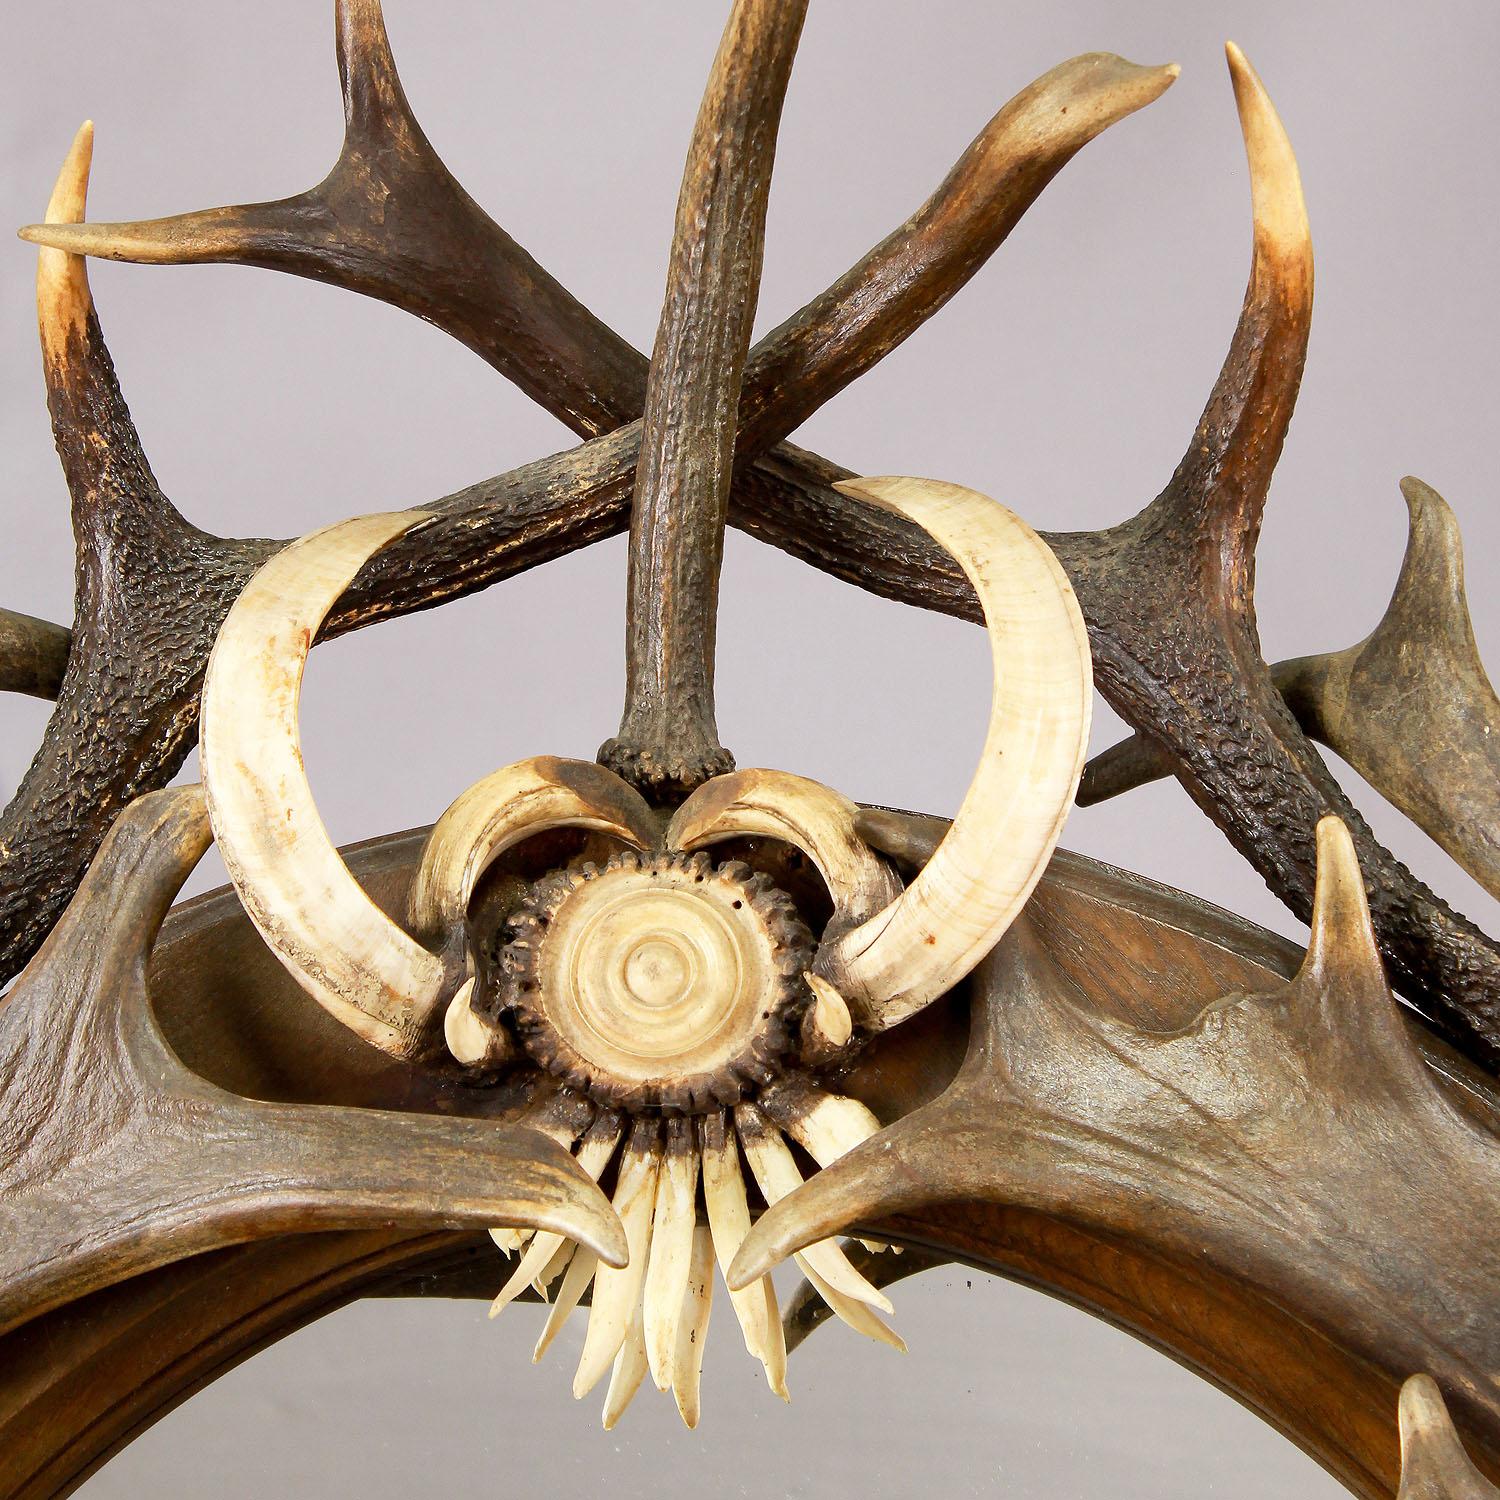 Large antique antler standing mirror, Germany, ca. 1890

A great antique Black Forest antler standing mirror manufactured in Germany around 1890. An oval wooden frame richly decorated with antlers from the deer, the fallow deer, wild boar tusks and